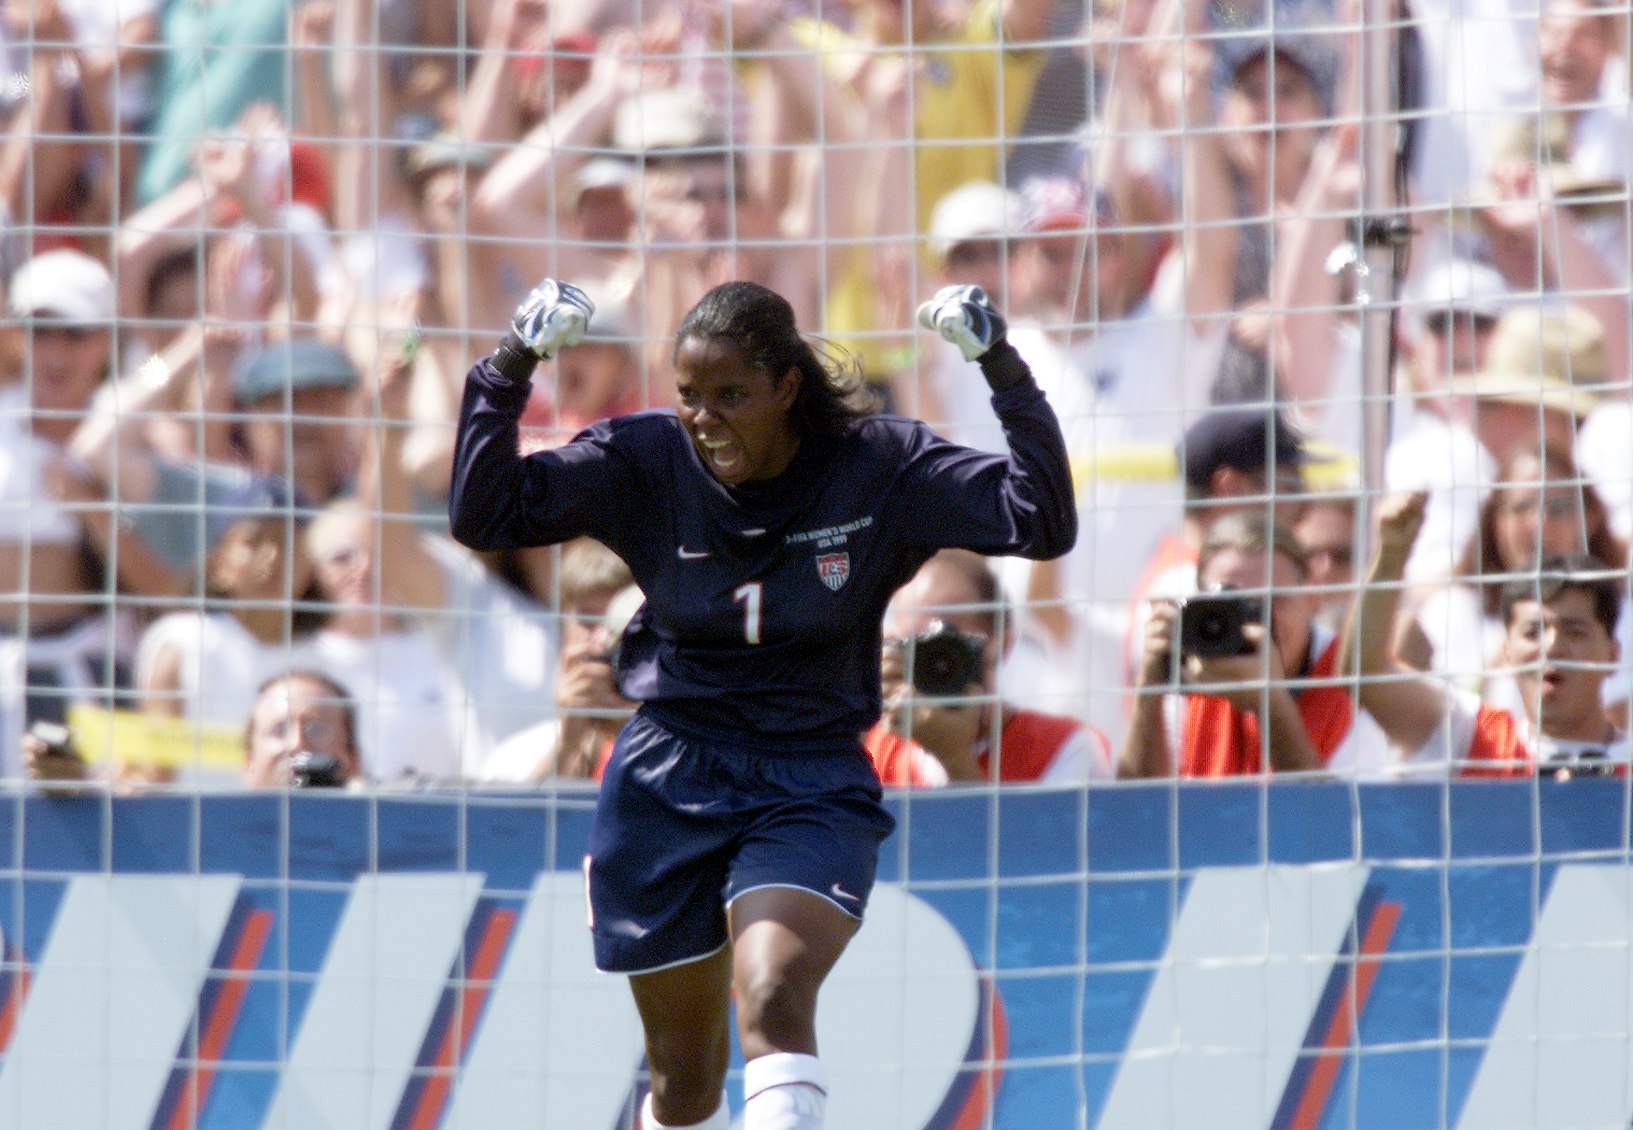 Then and Now: The Development of U.S. Women’s Soccer